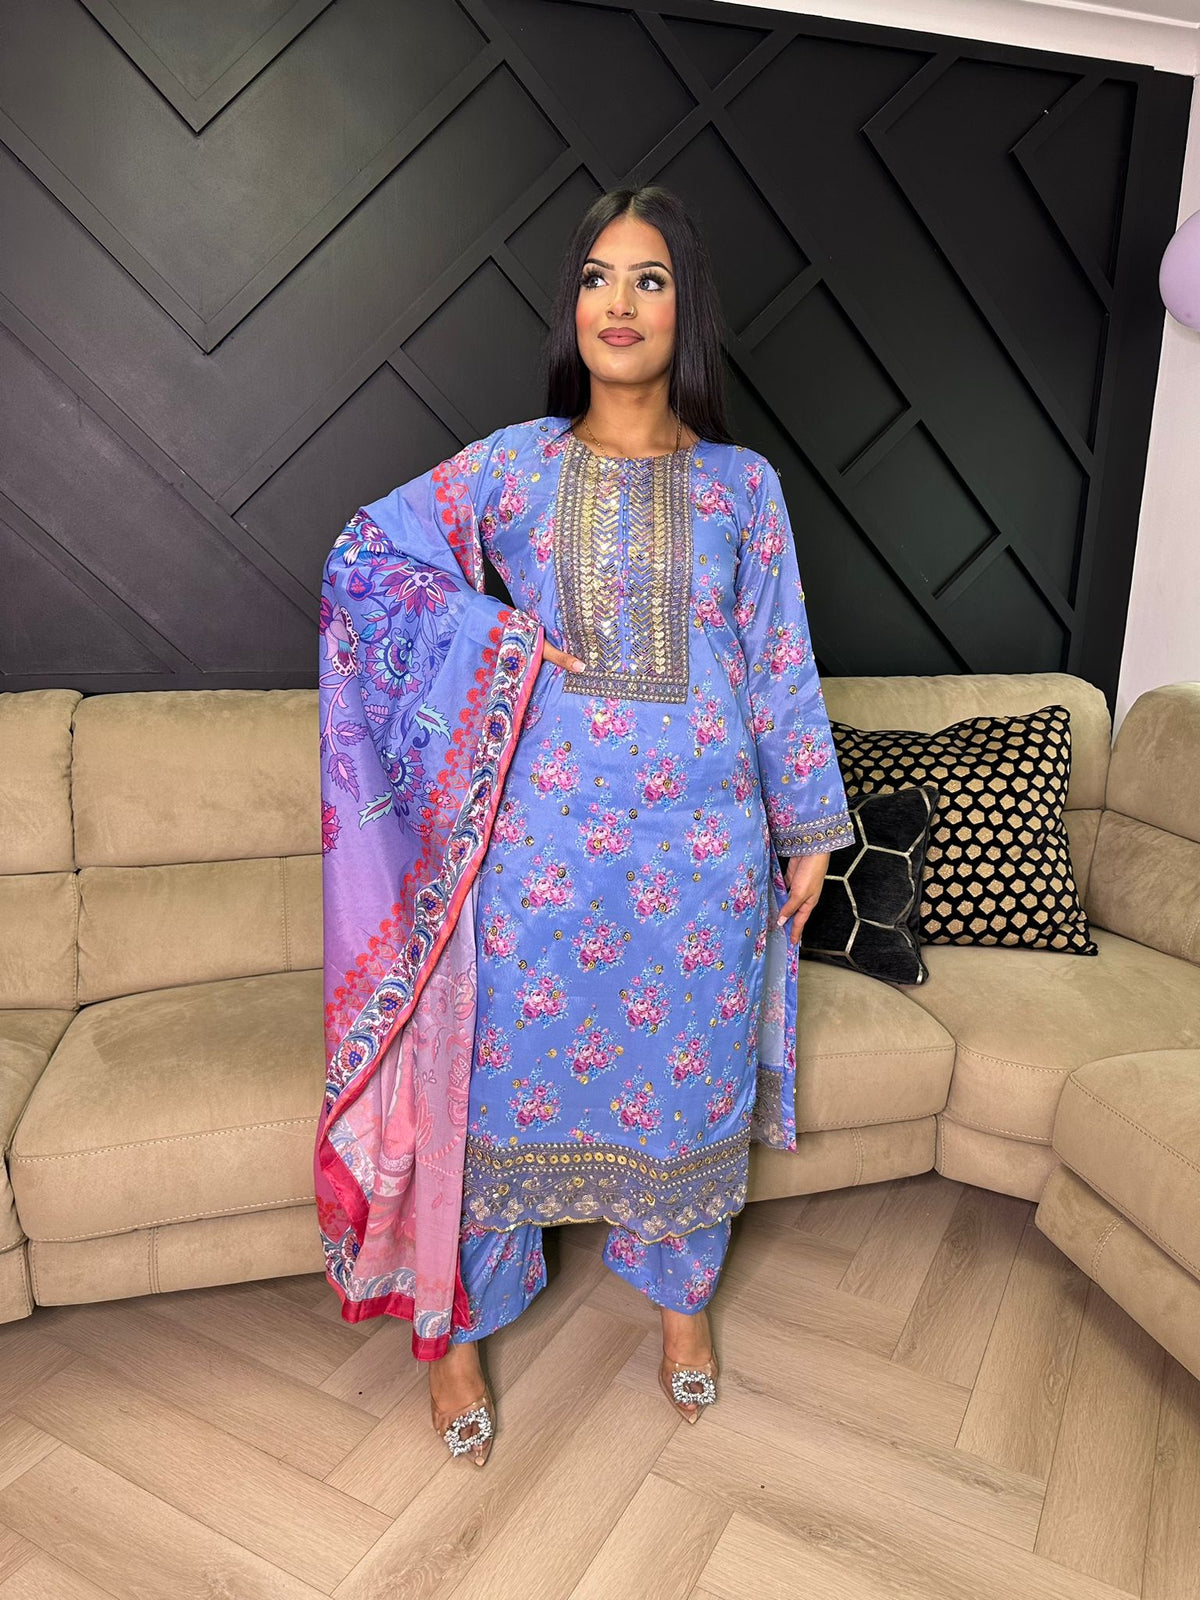 Sitare by Raniya - Blue and Pink Floral